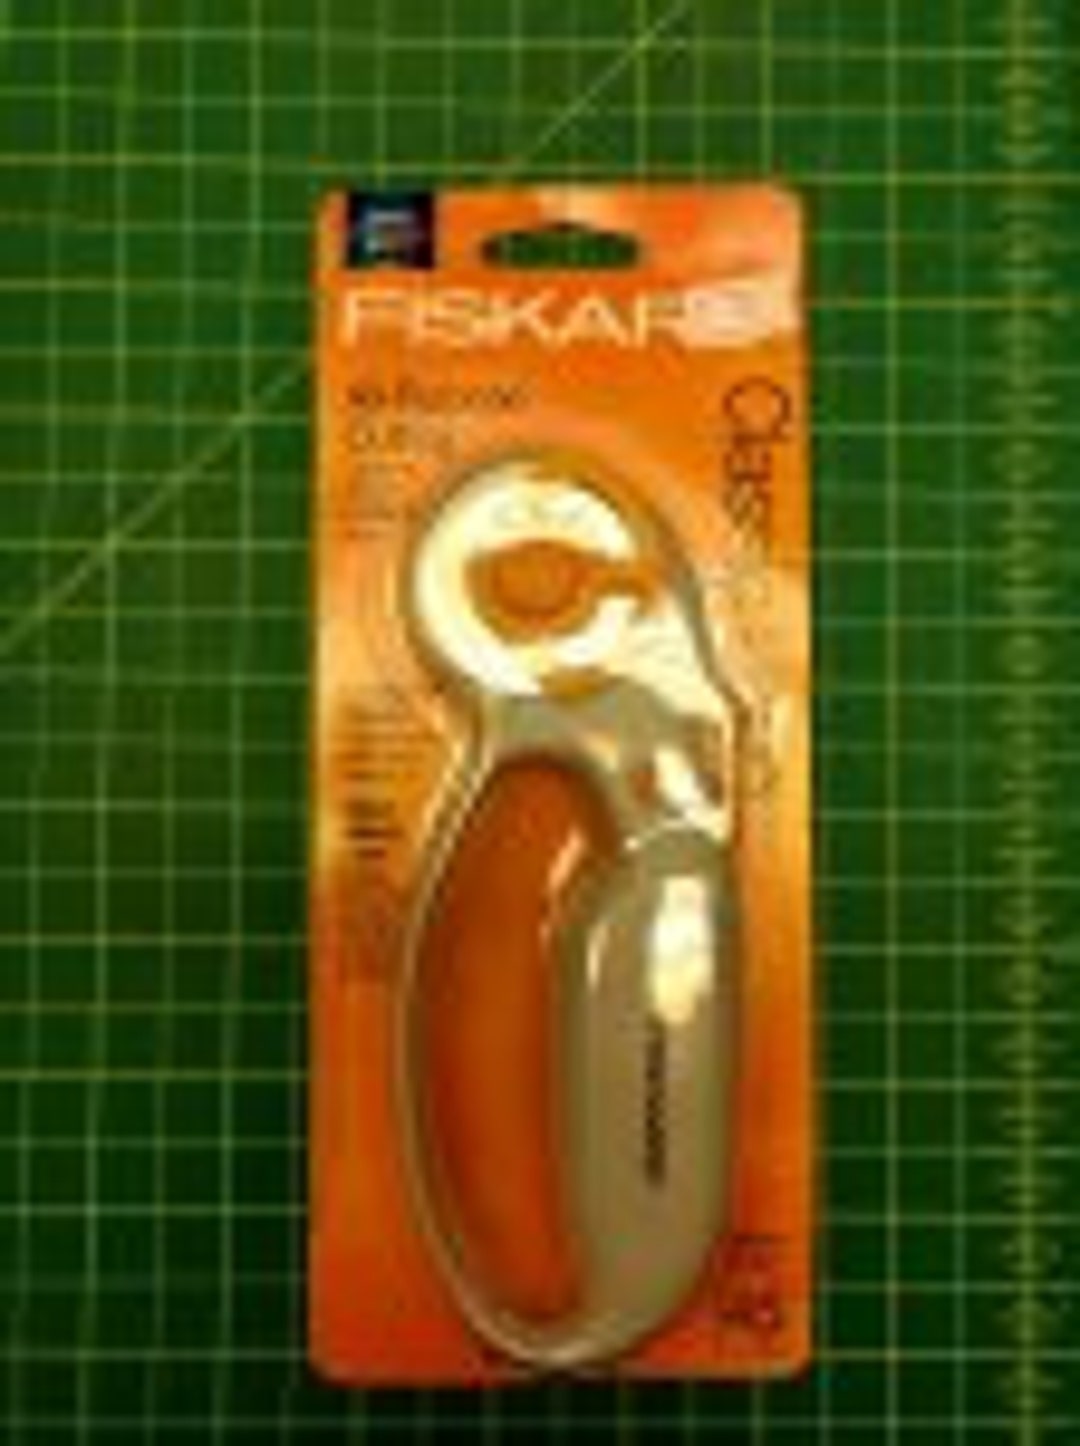 Fiskars Rotary Cutting Set: Sewing: 3 Pieces